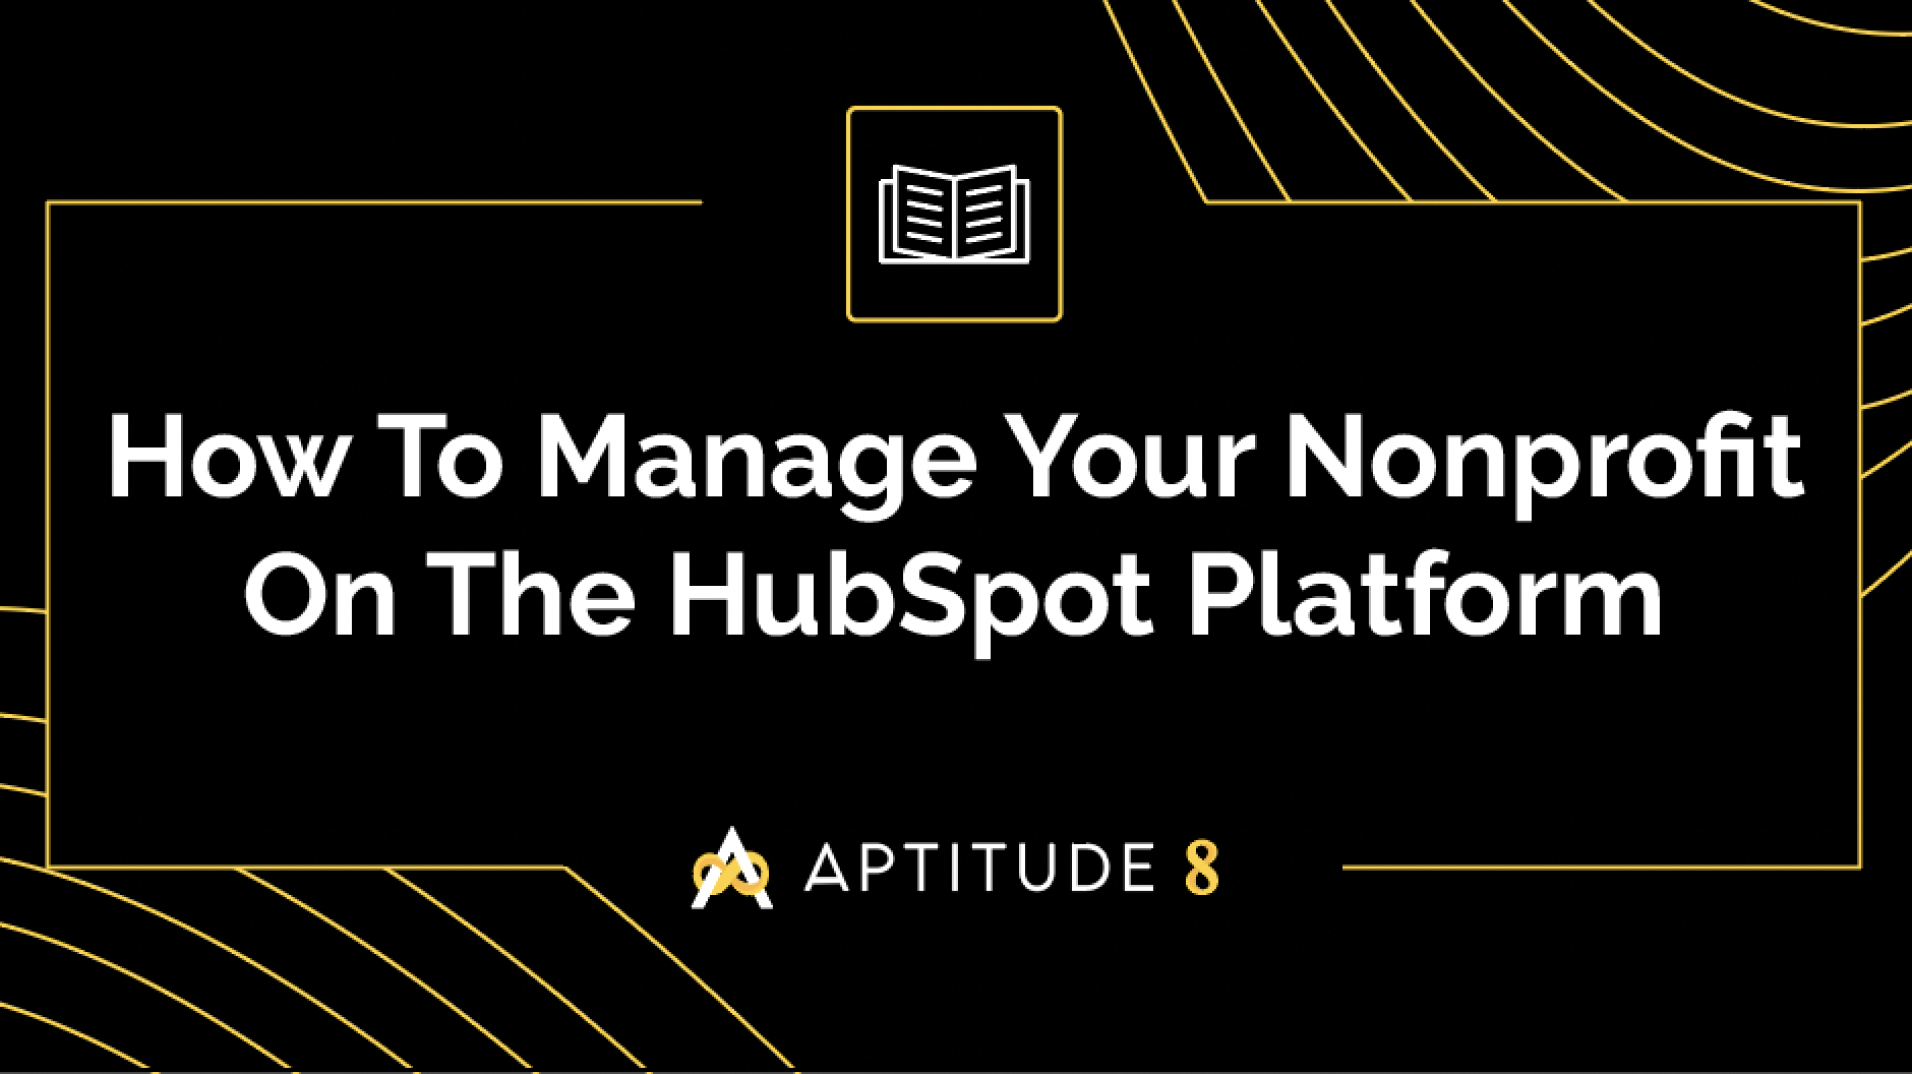 Manage Nonprofit on HubSpot - Guide - Feature Image (1)